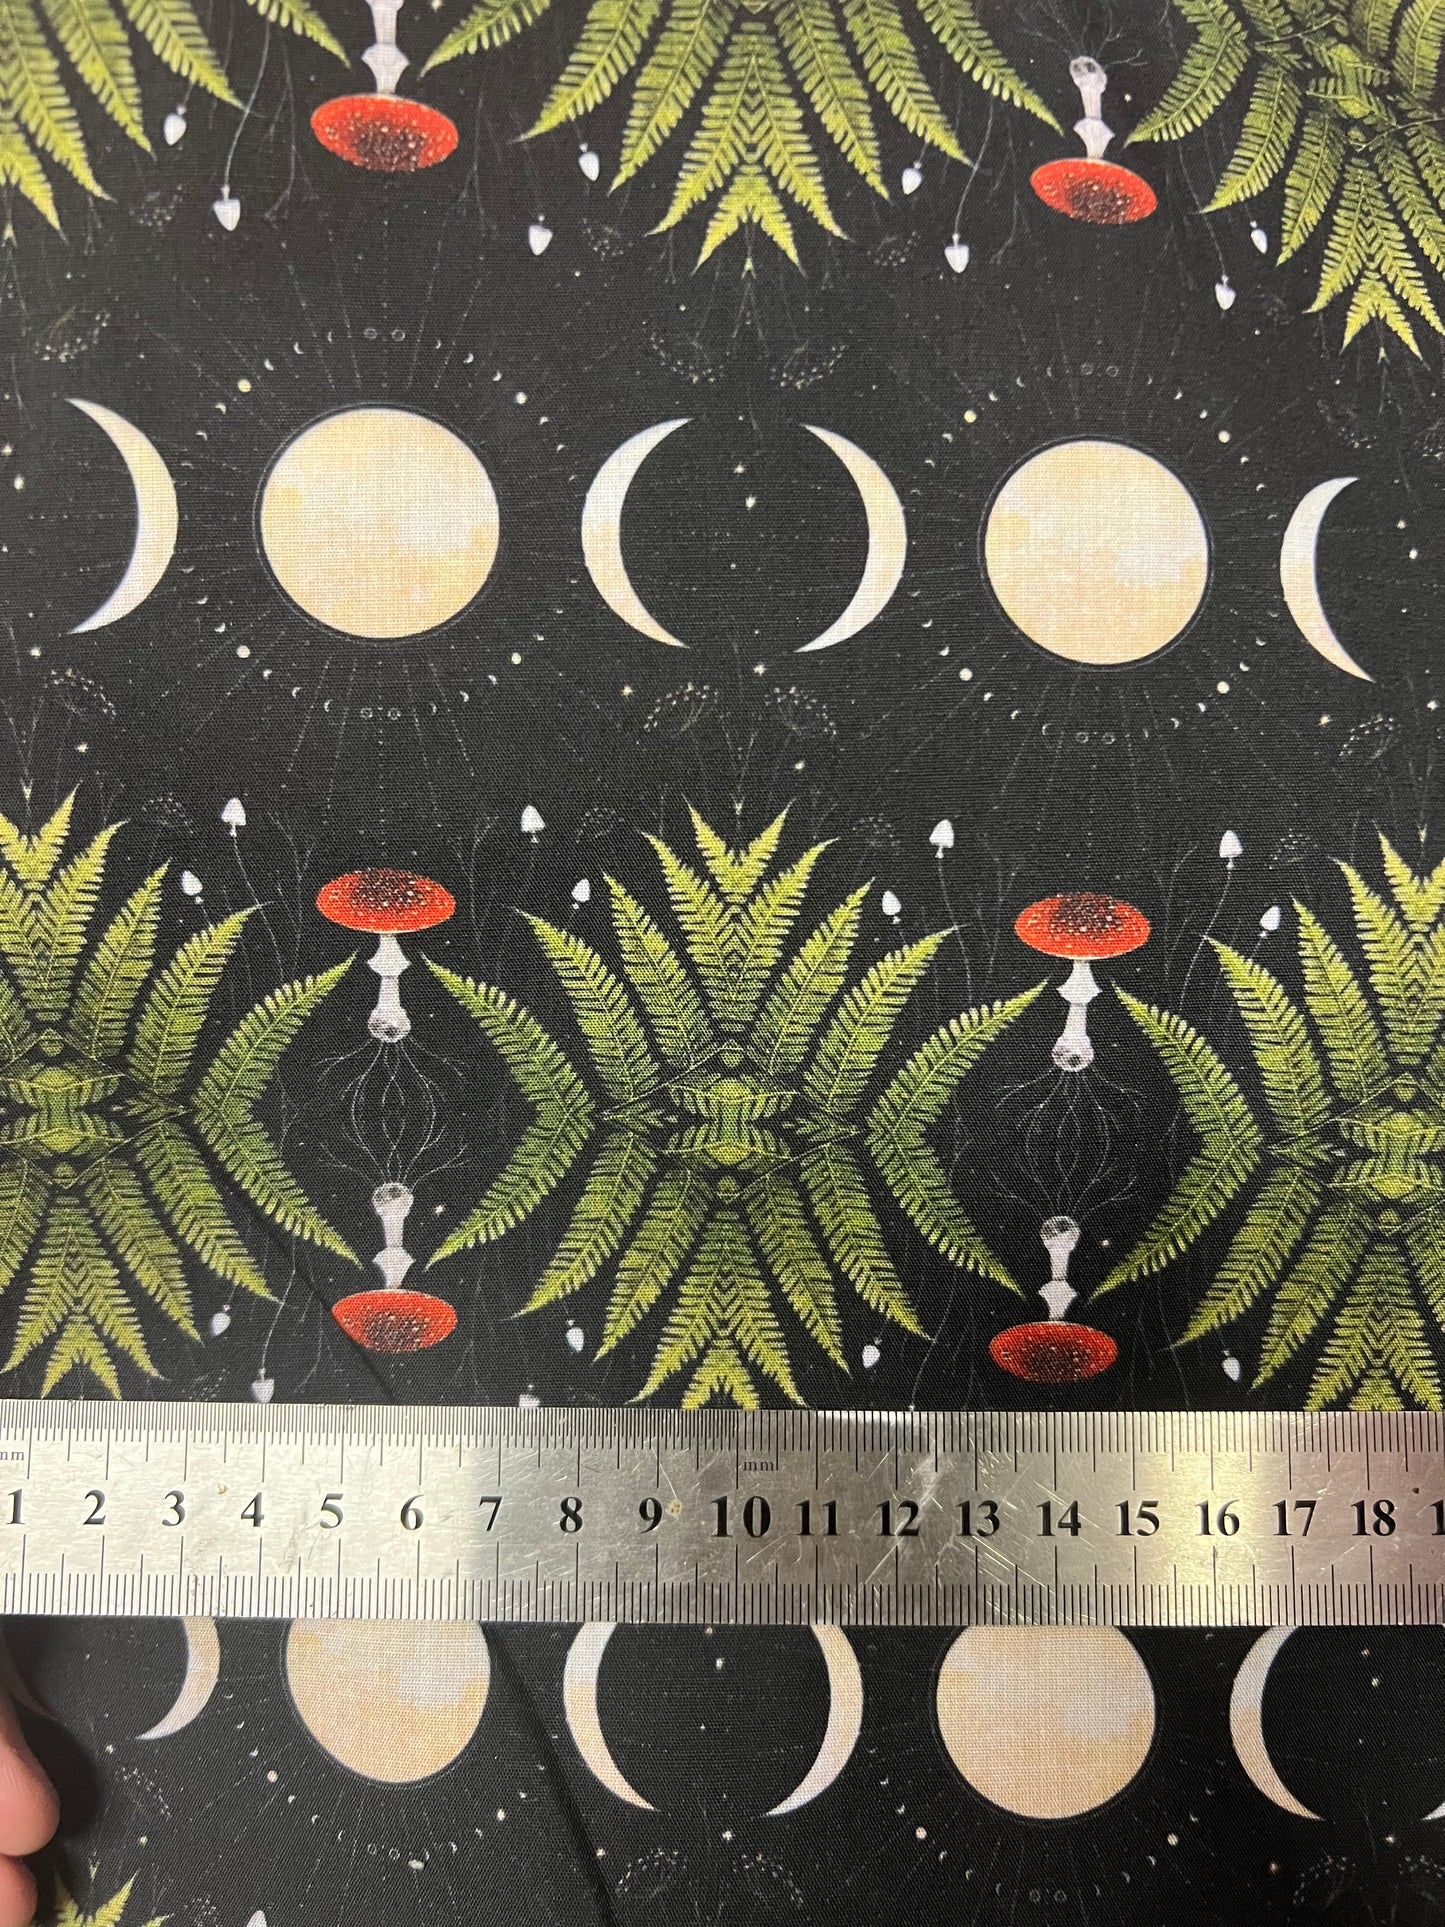 COTTAGECORE TRIPLE MOON - Polycotton Fabric from Japan